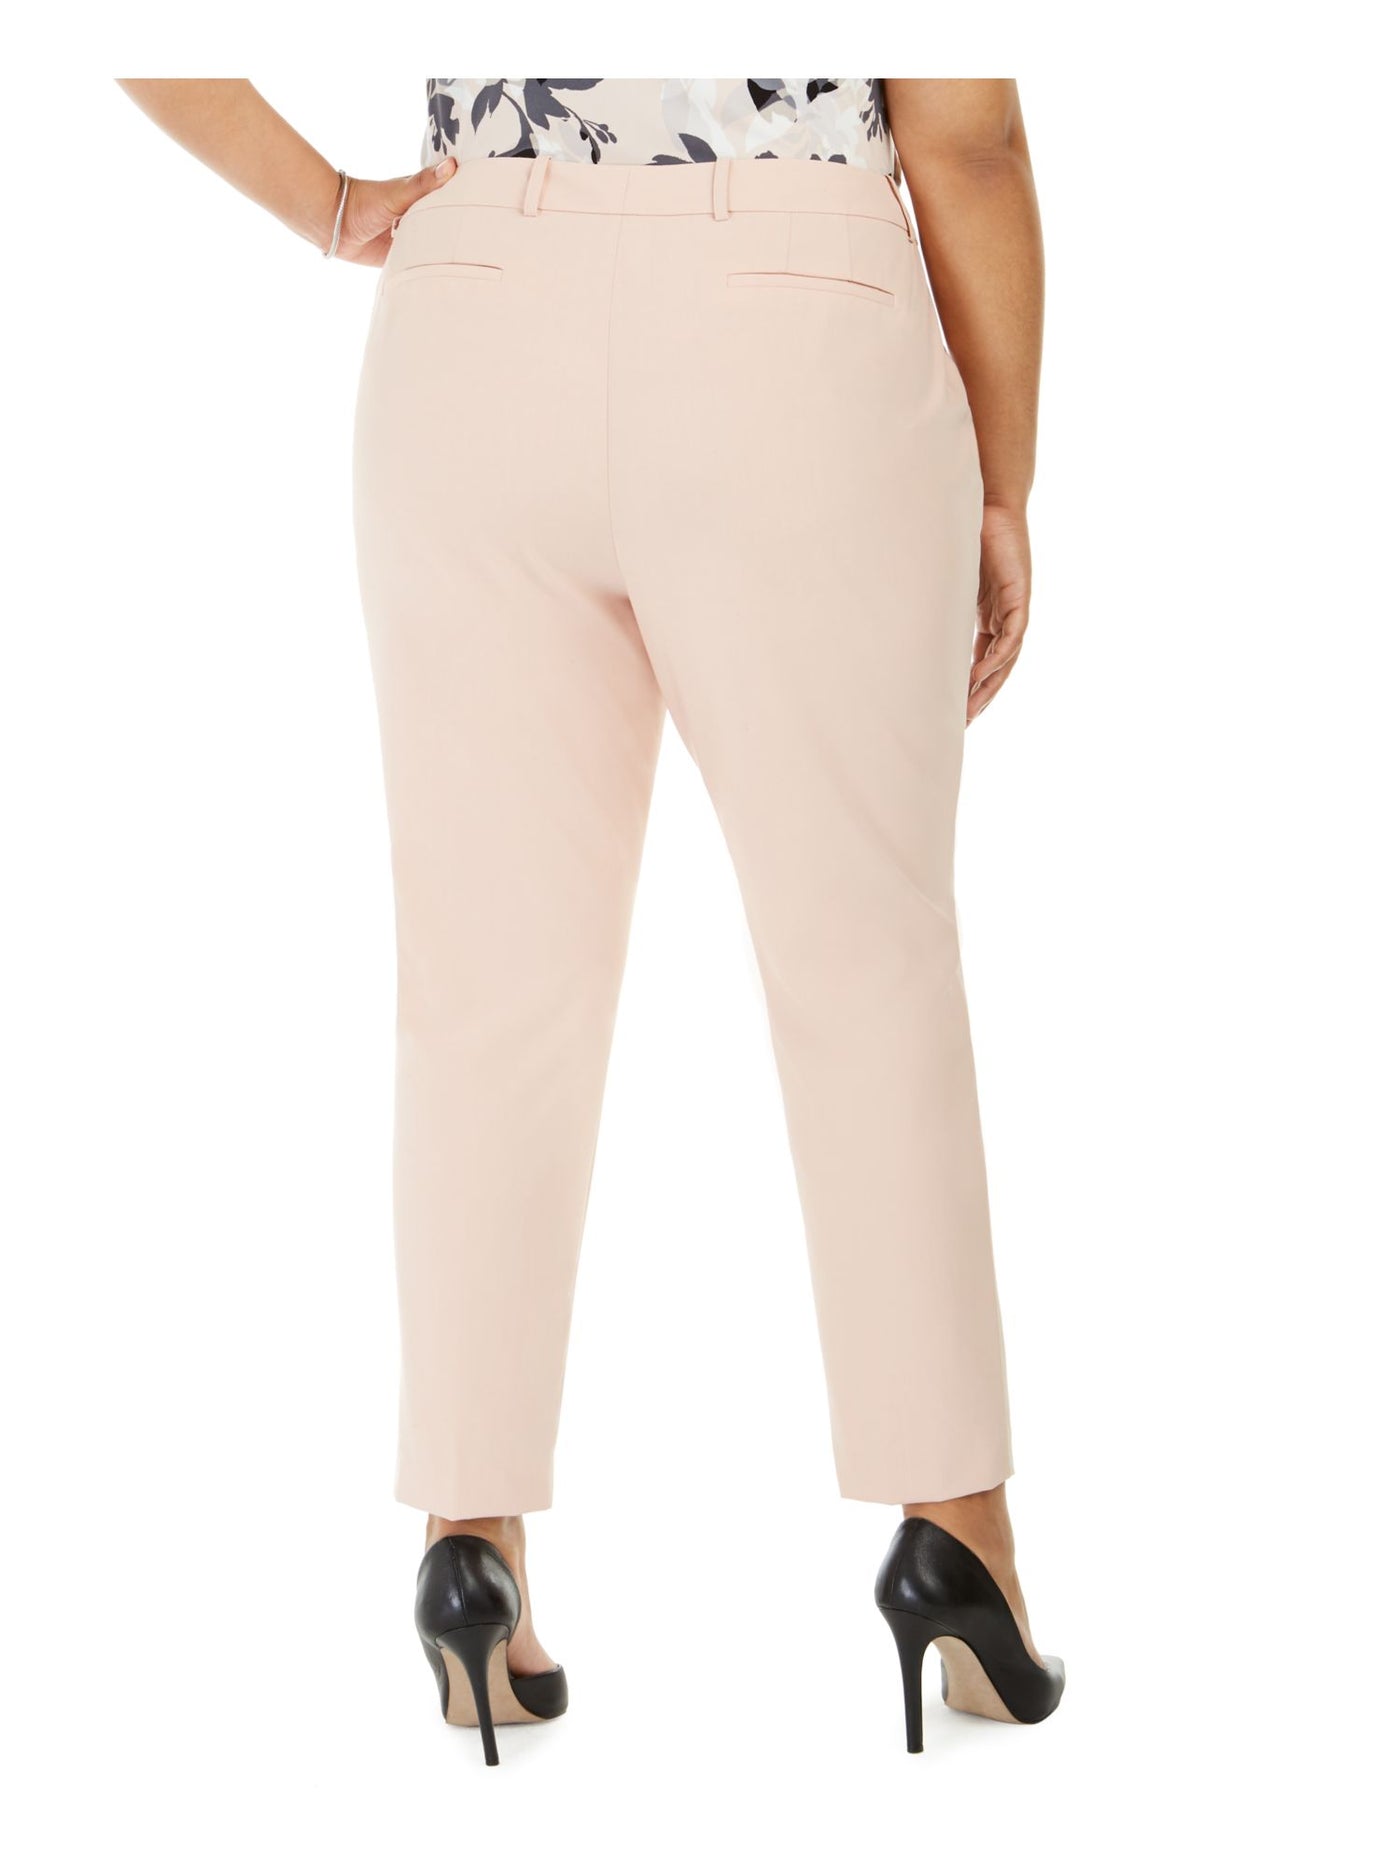 CALVIN KLEIN Womens Pink Stretch Zippered Pocketed Wear To Work Straight leg Pants Plus 20W